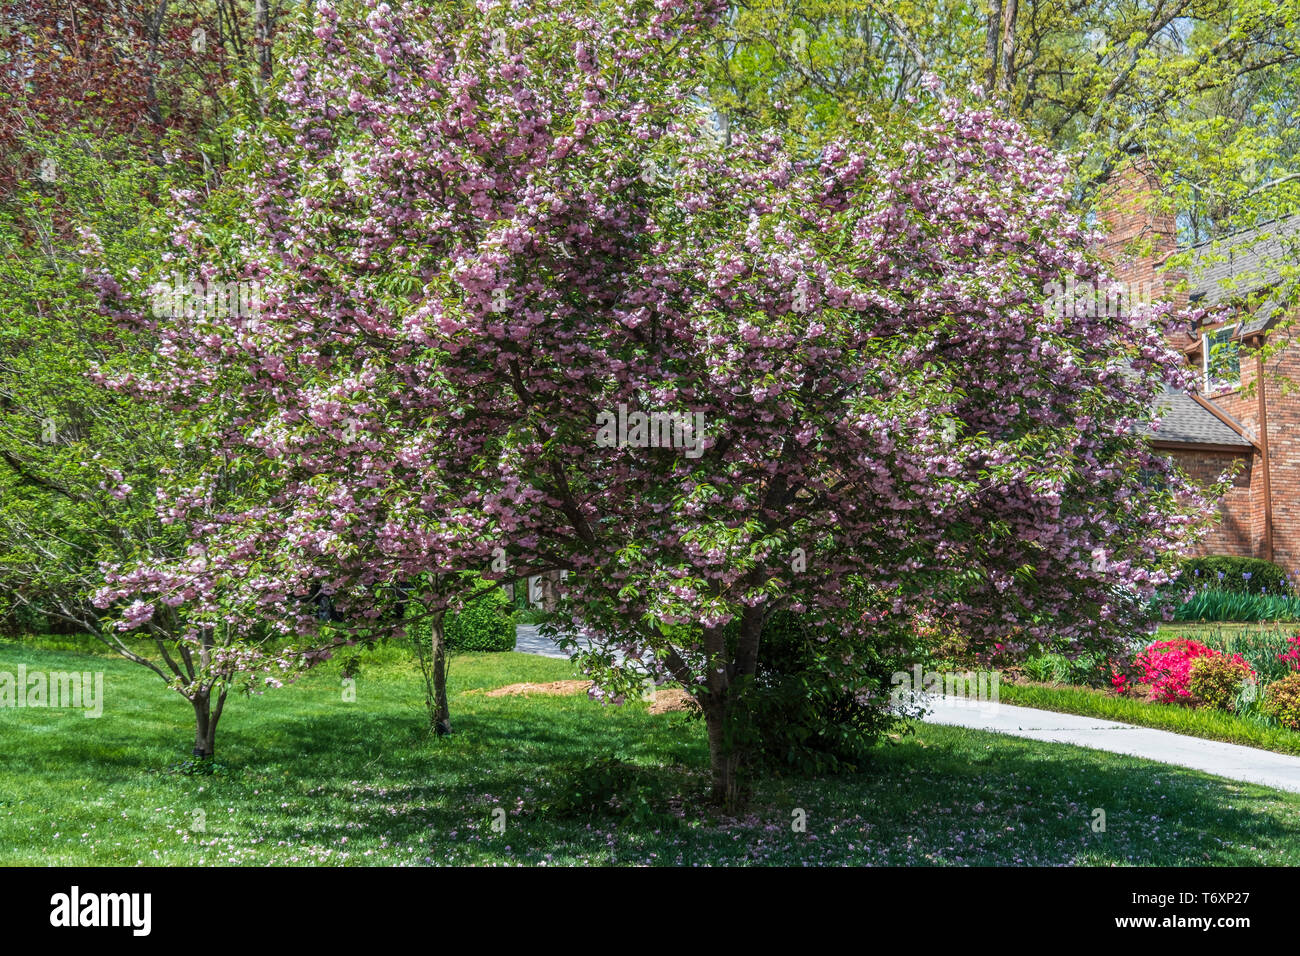 Pink flowering dogwood, Cornus florida, in a suburban setting, blooming in Tennessee, USA. Stock Photo